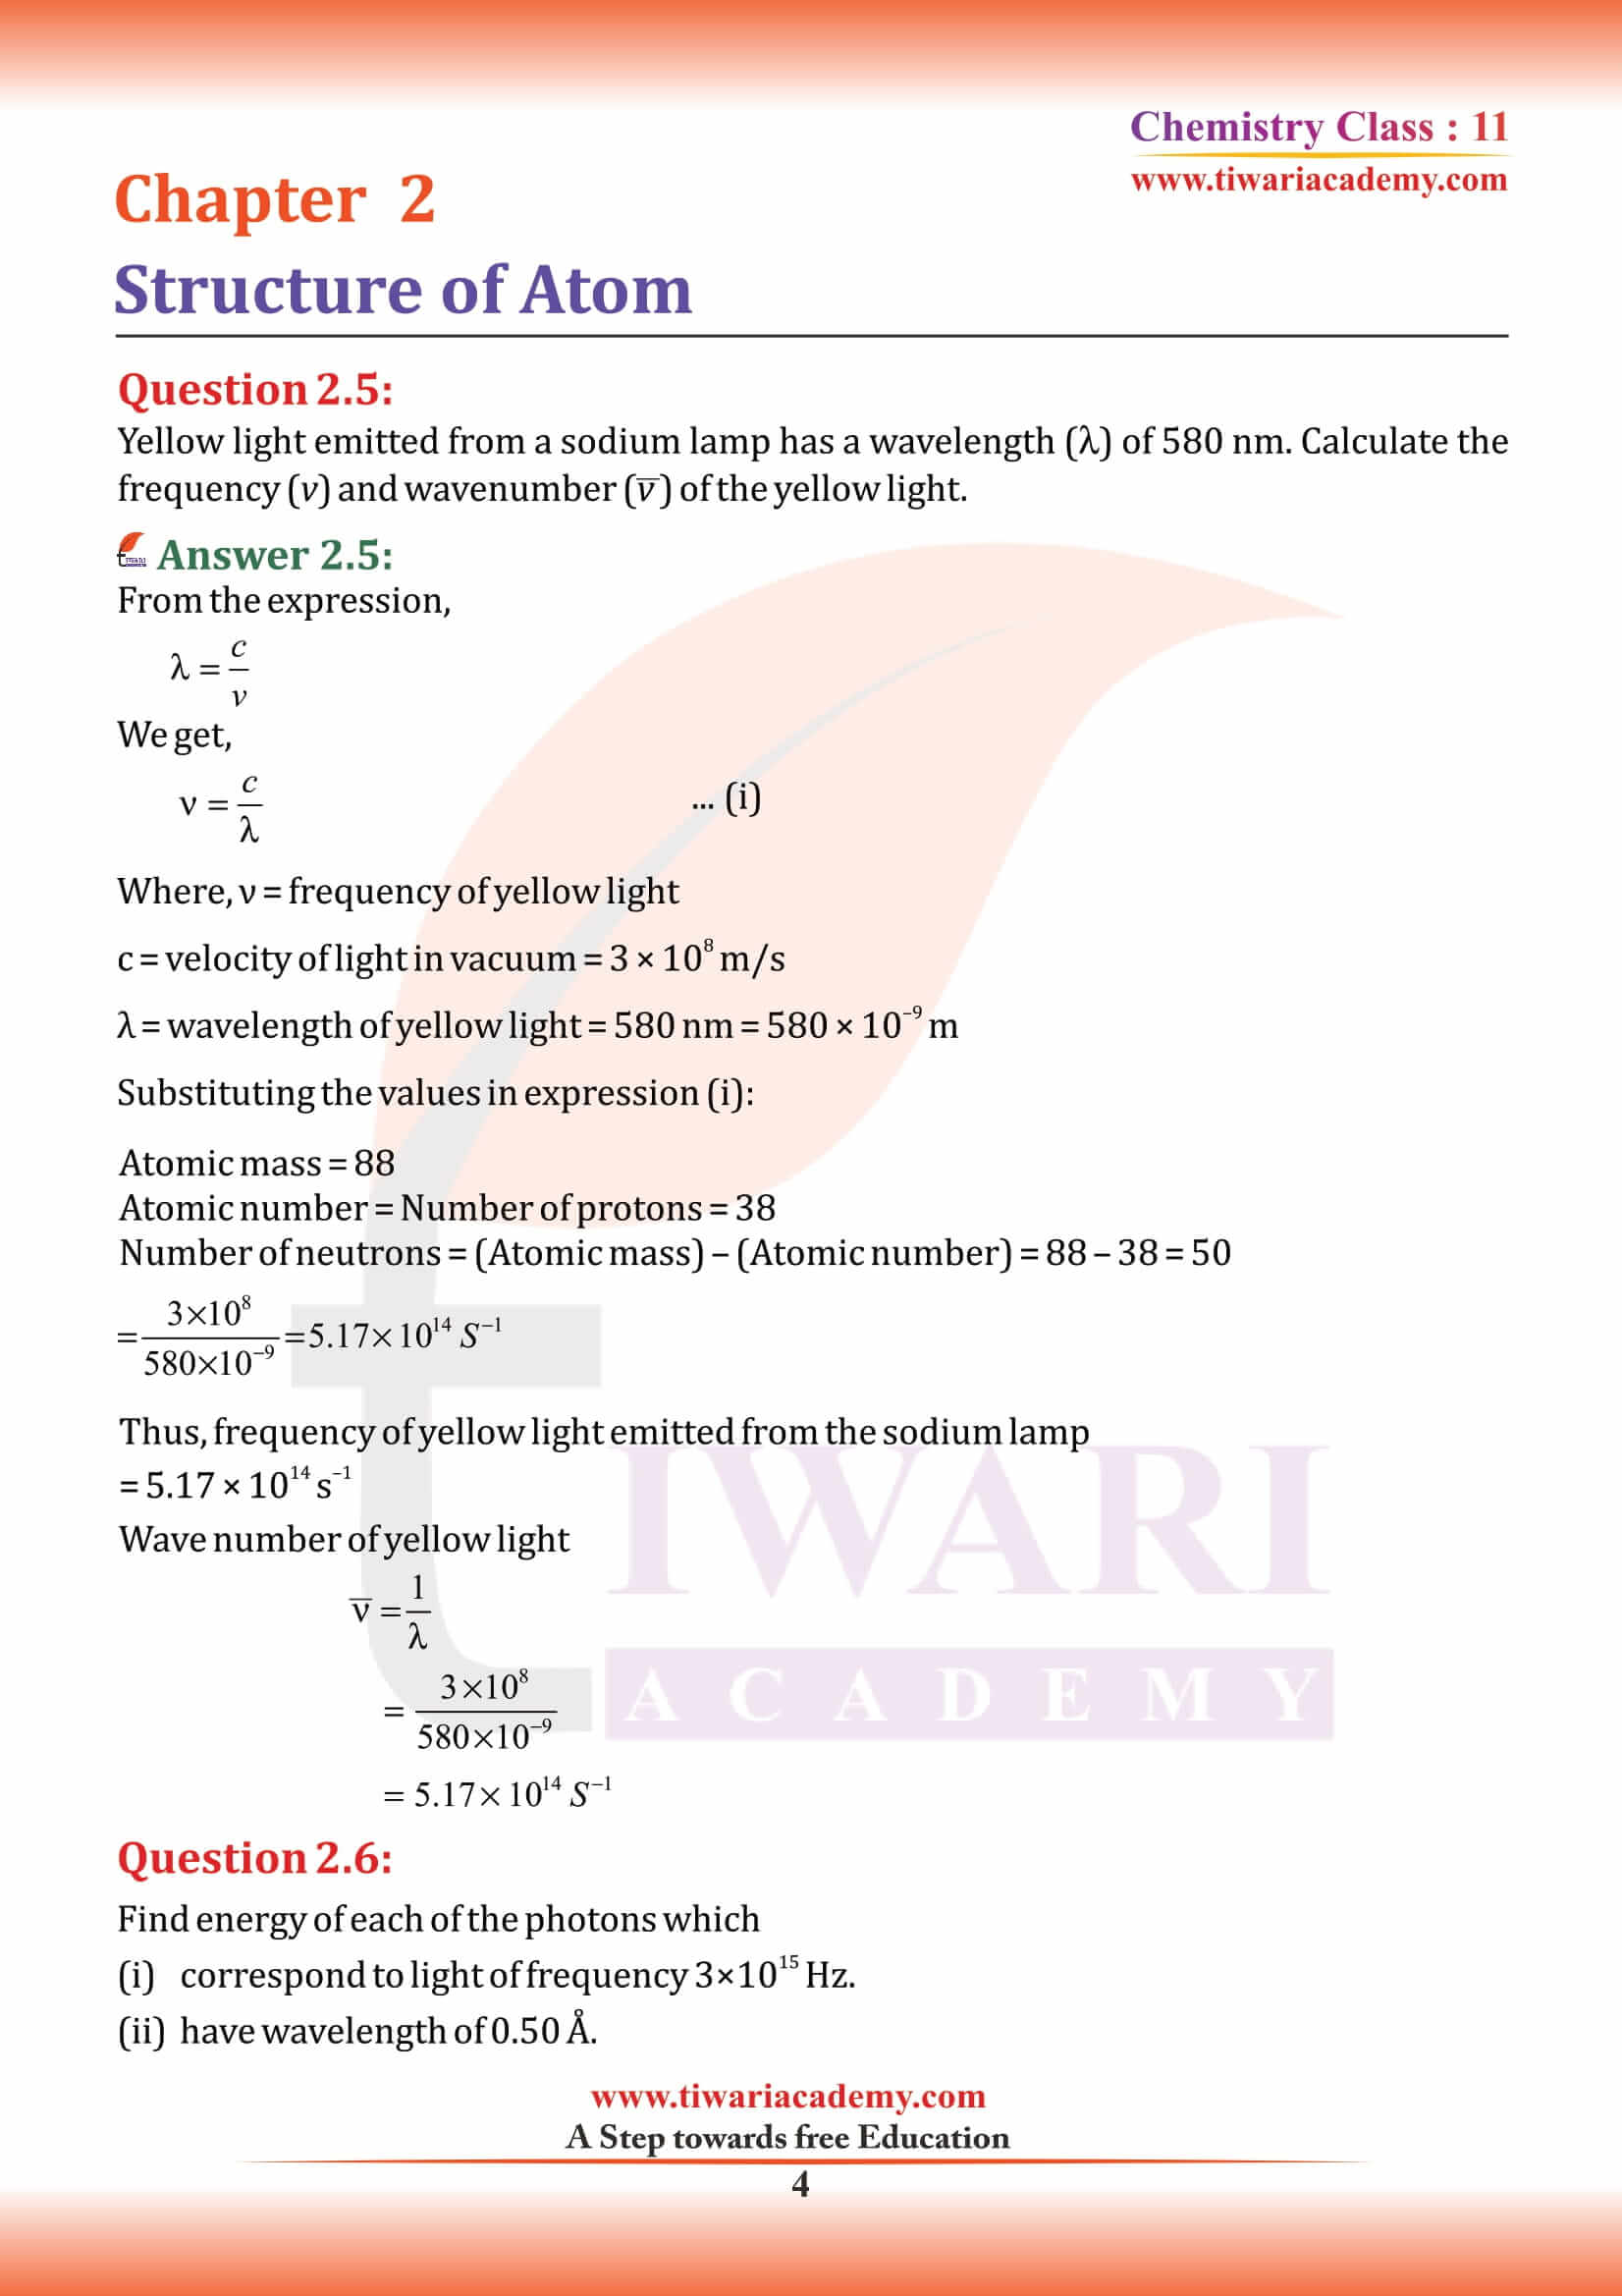 NCERT Solutions for Class 11 Chemistry Chapter 2 in PDF